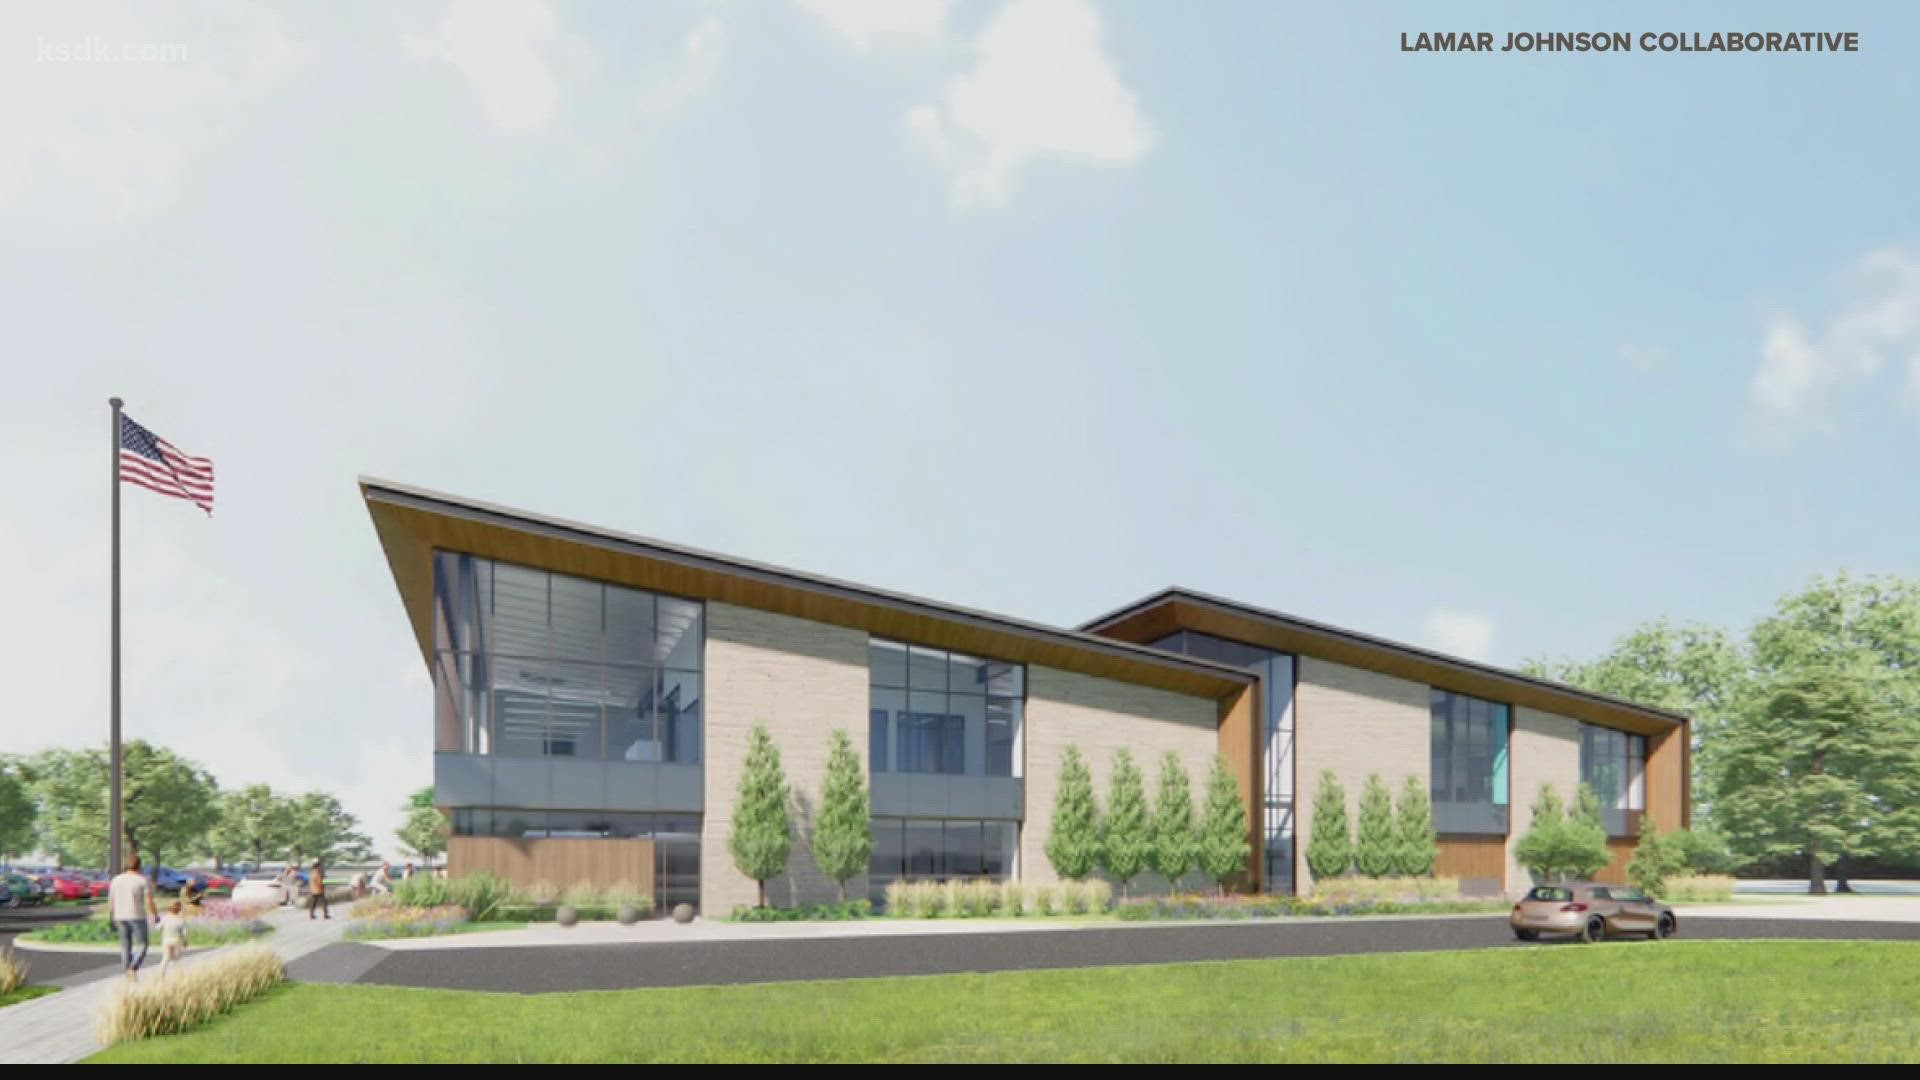 An upgrade for St. Louis County libraries. Officials plan to build a new library in Ladue to replace the current headquarter building on Lindbergh.